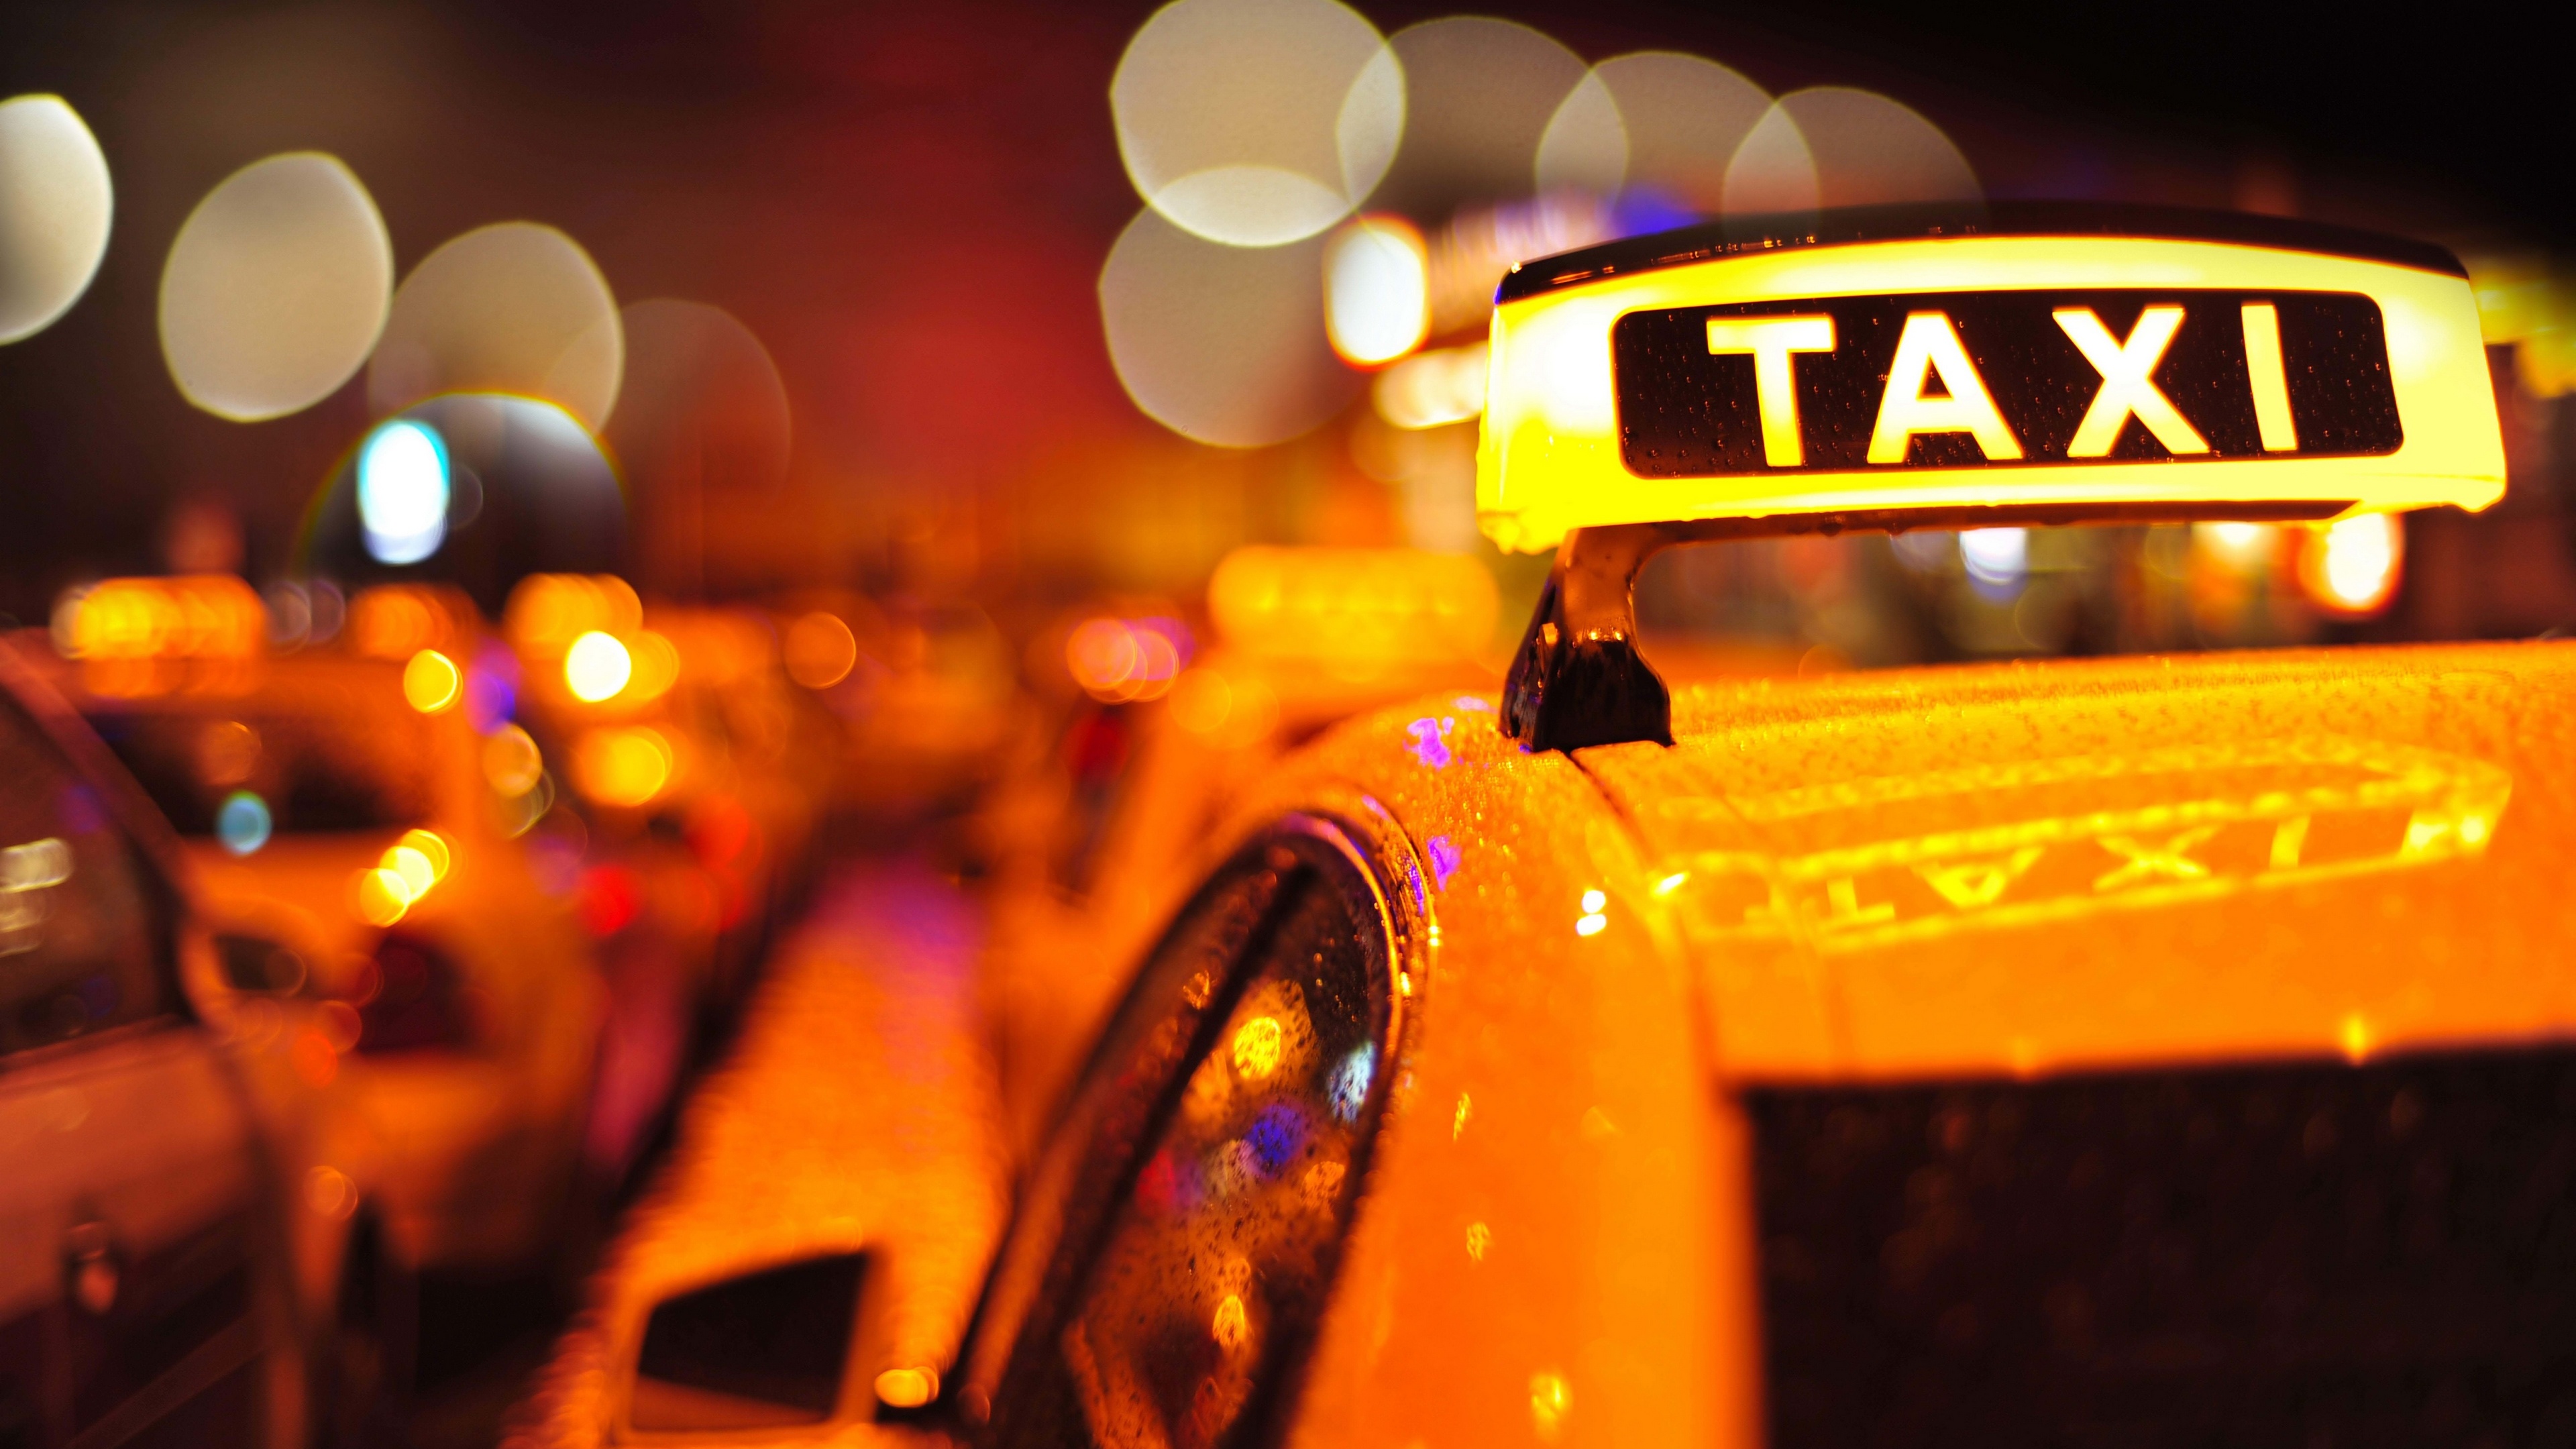 Taxi: A car with a driver whom you pay to take you where you want to go. 3840x2160 4K Wallpaper.